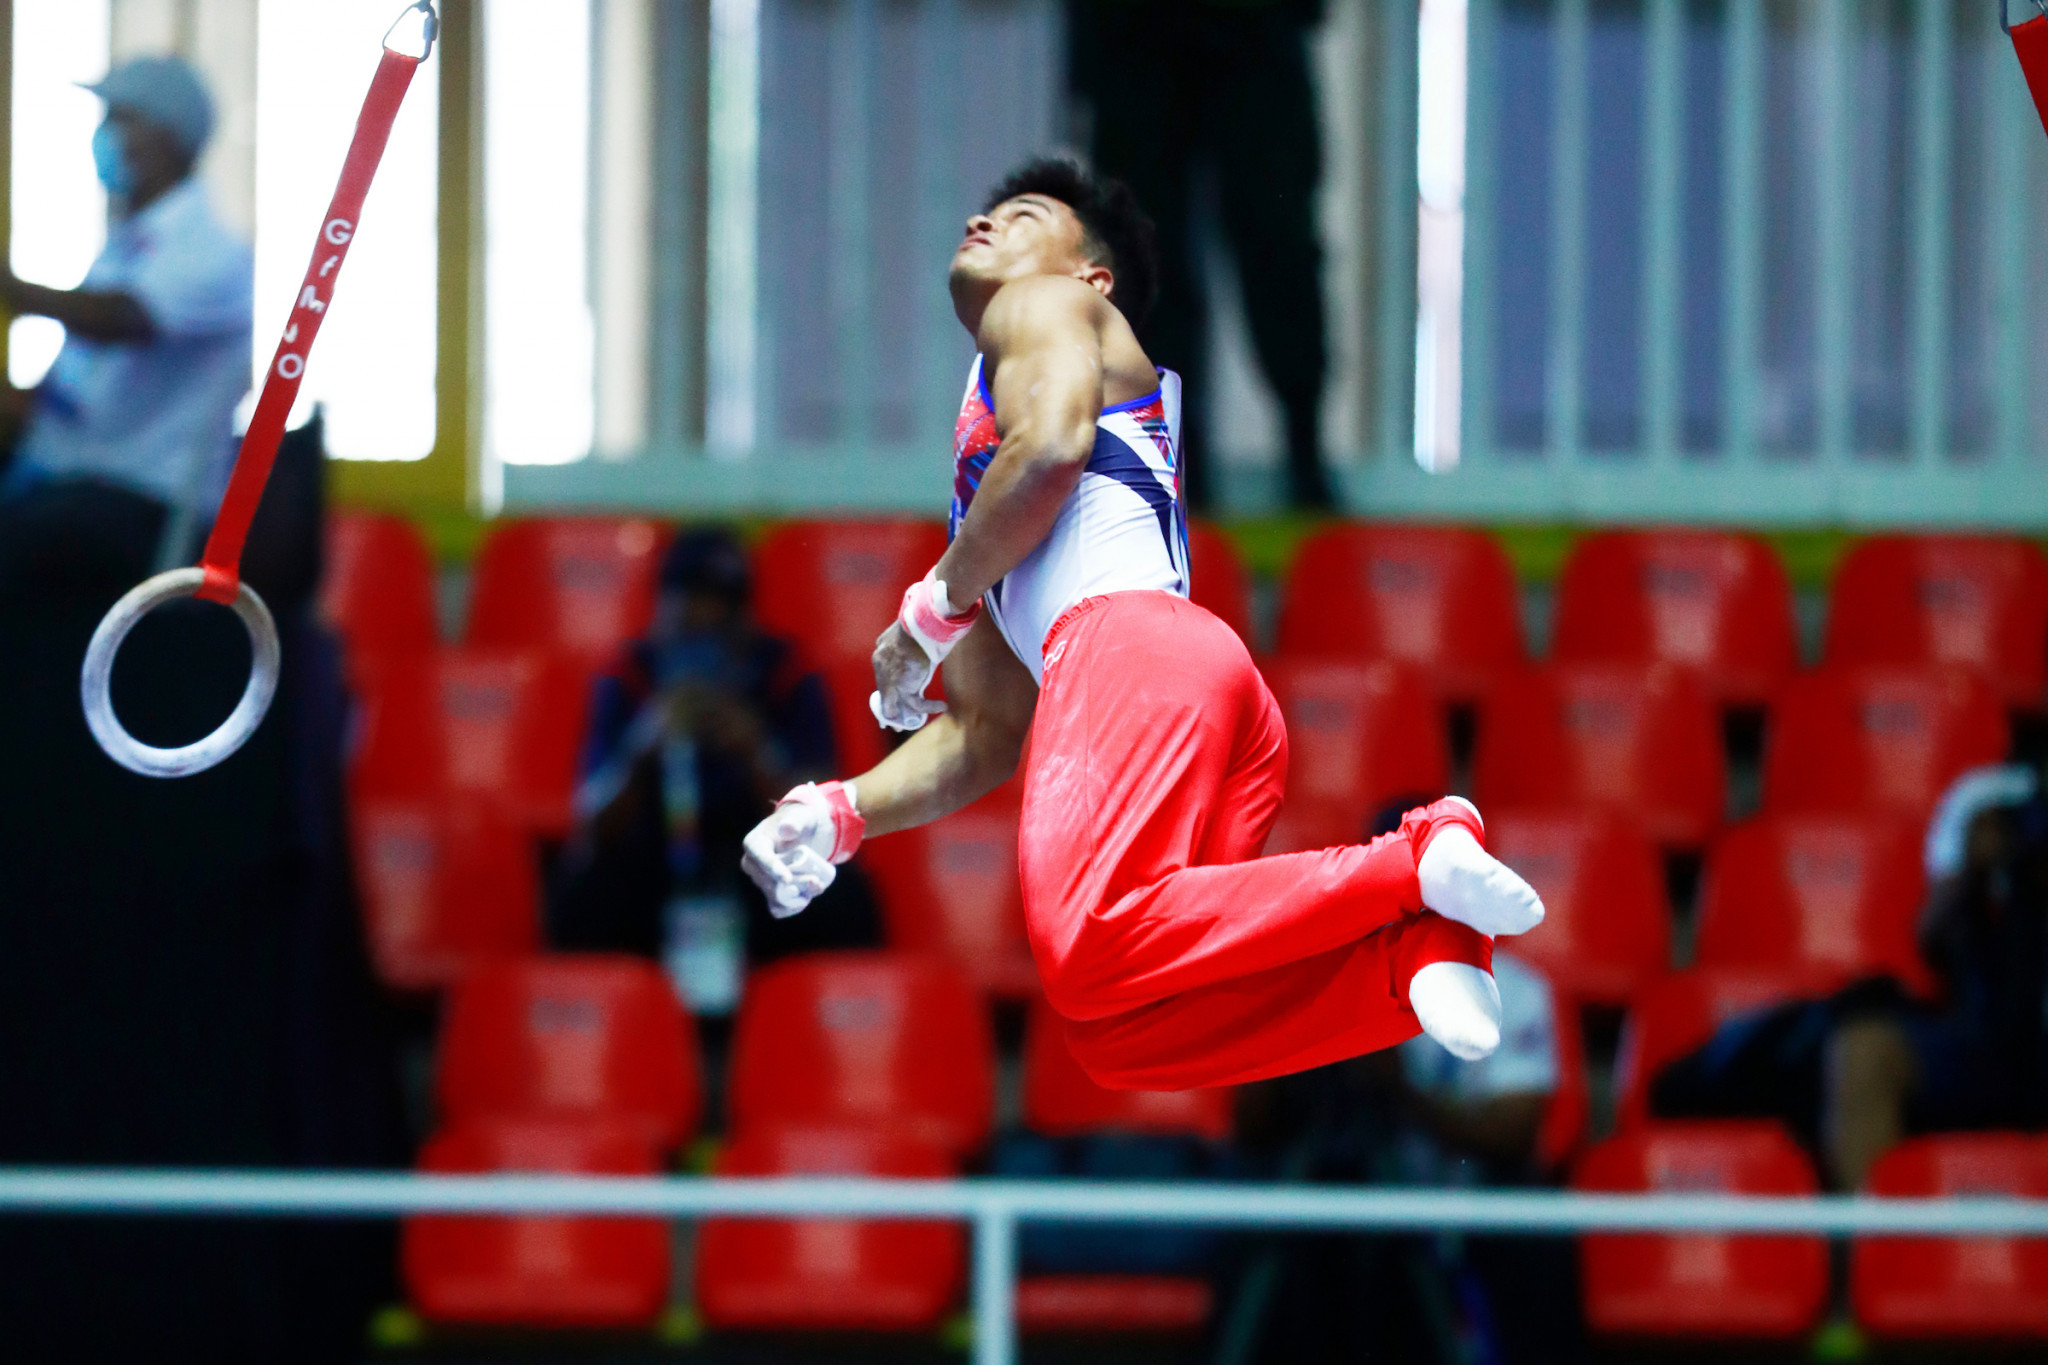 Jabiel De Jesús Polanco Acosta of the Dominican Republic became the first athlete not from the United States to win a gold medal in the Cali 2021 artistic gymnastics events ©Agencia.Xpress Media